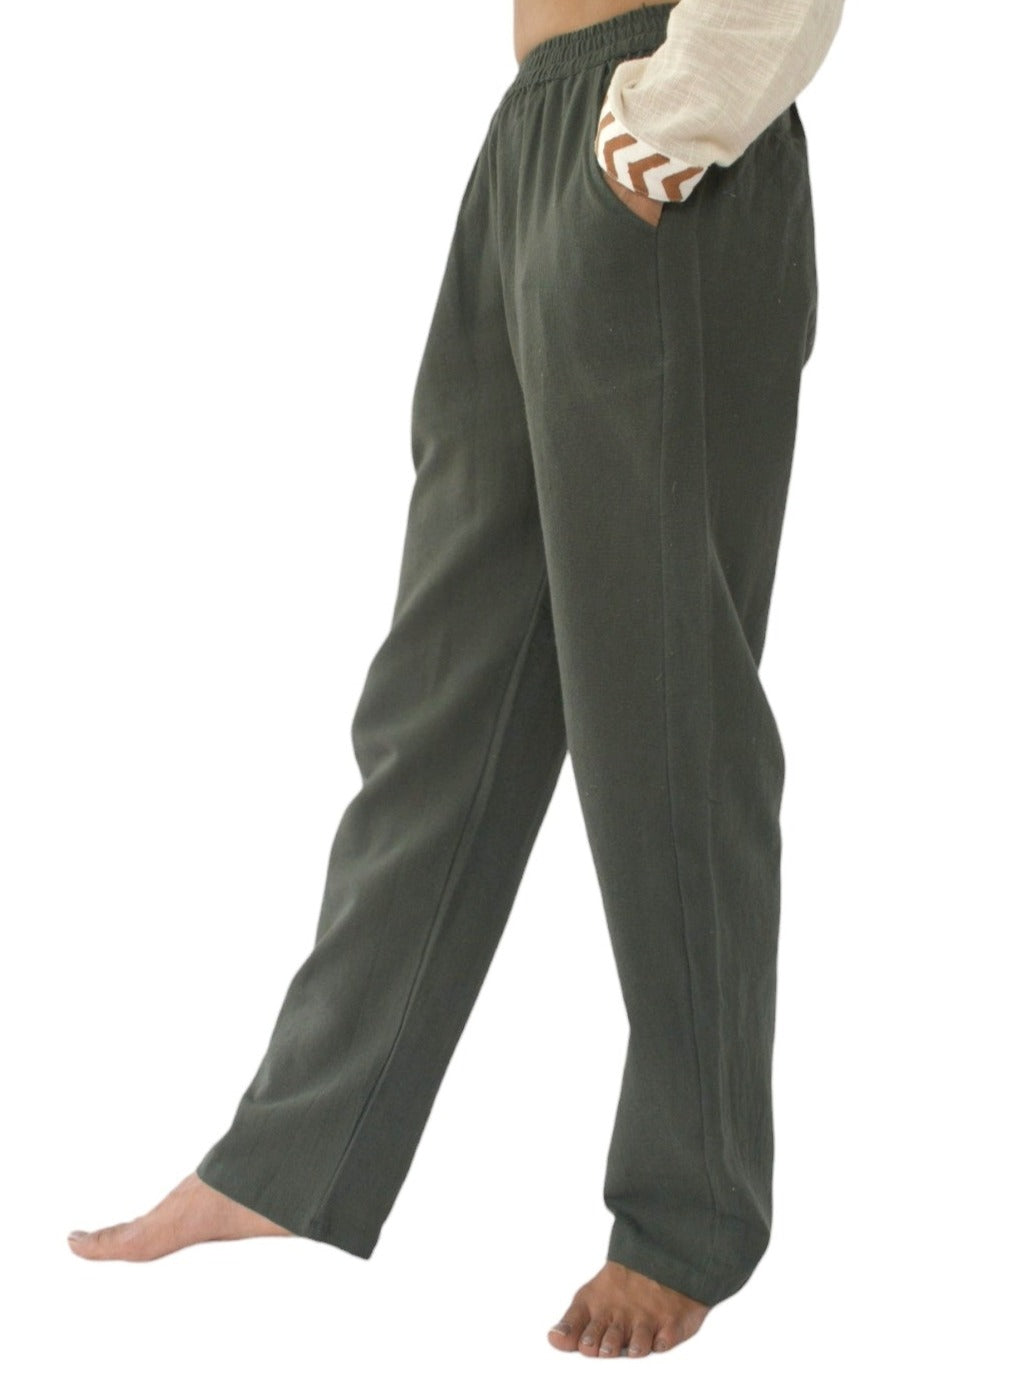 Forest Green Unisex Organic Cotton Free Size Trousers